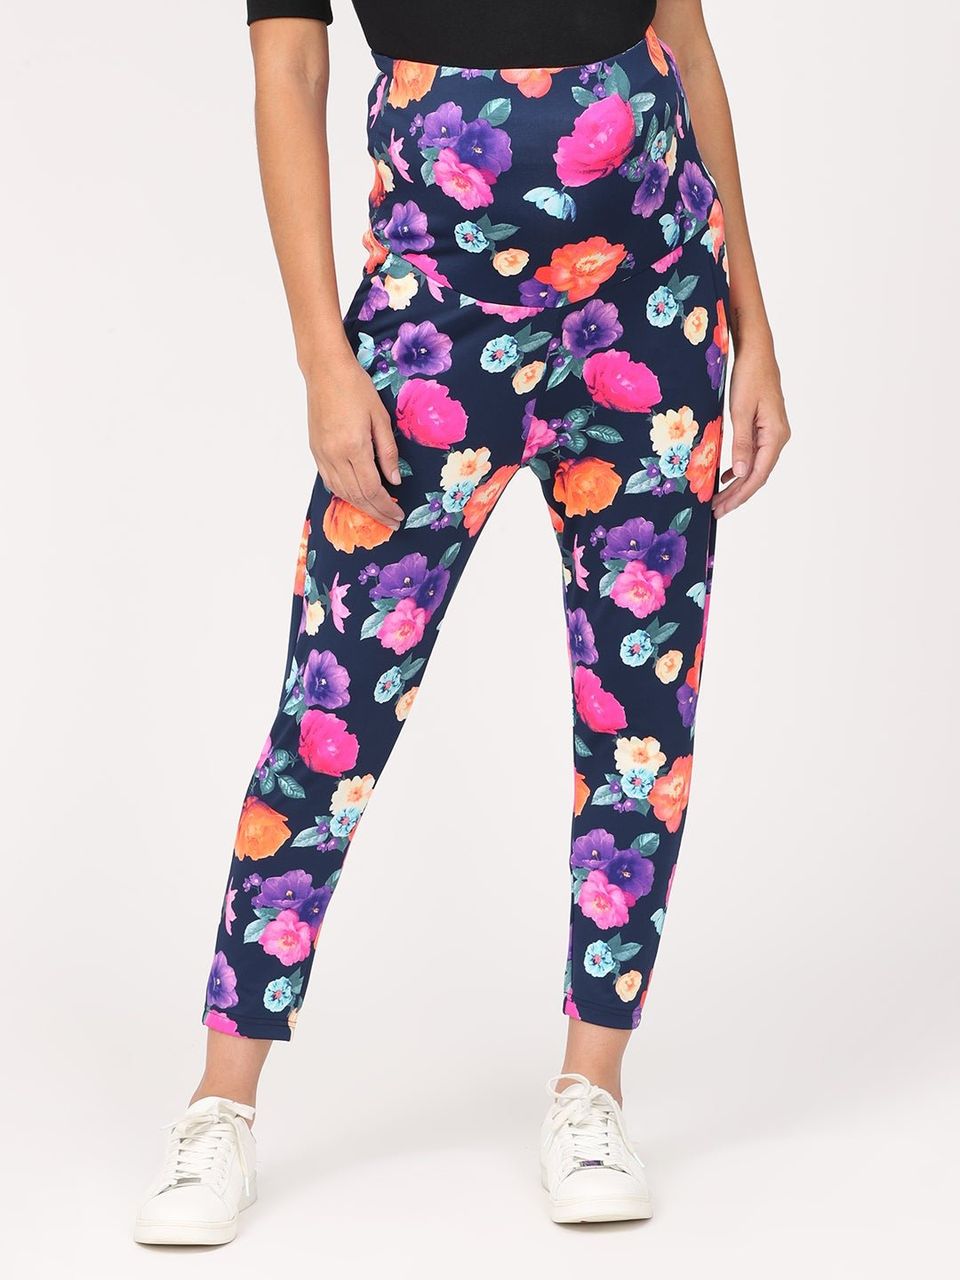 The Mom Store Autumn Flowers Maternity Athleisure Pants